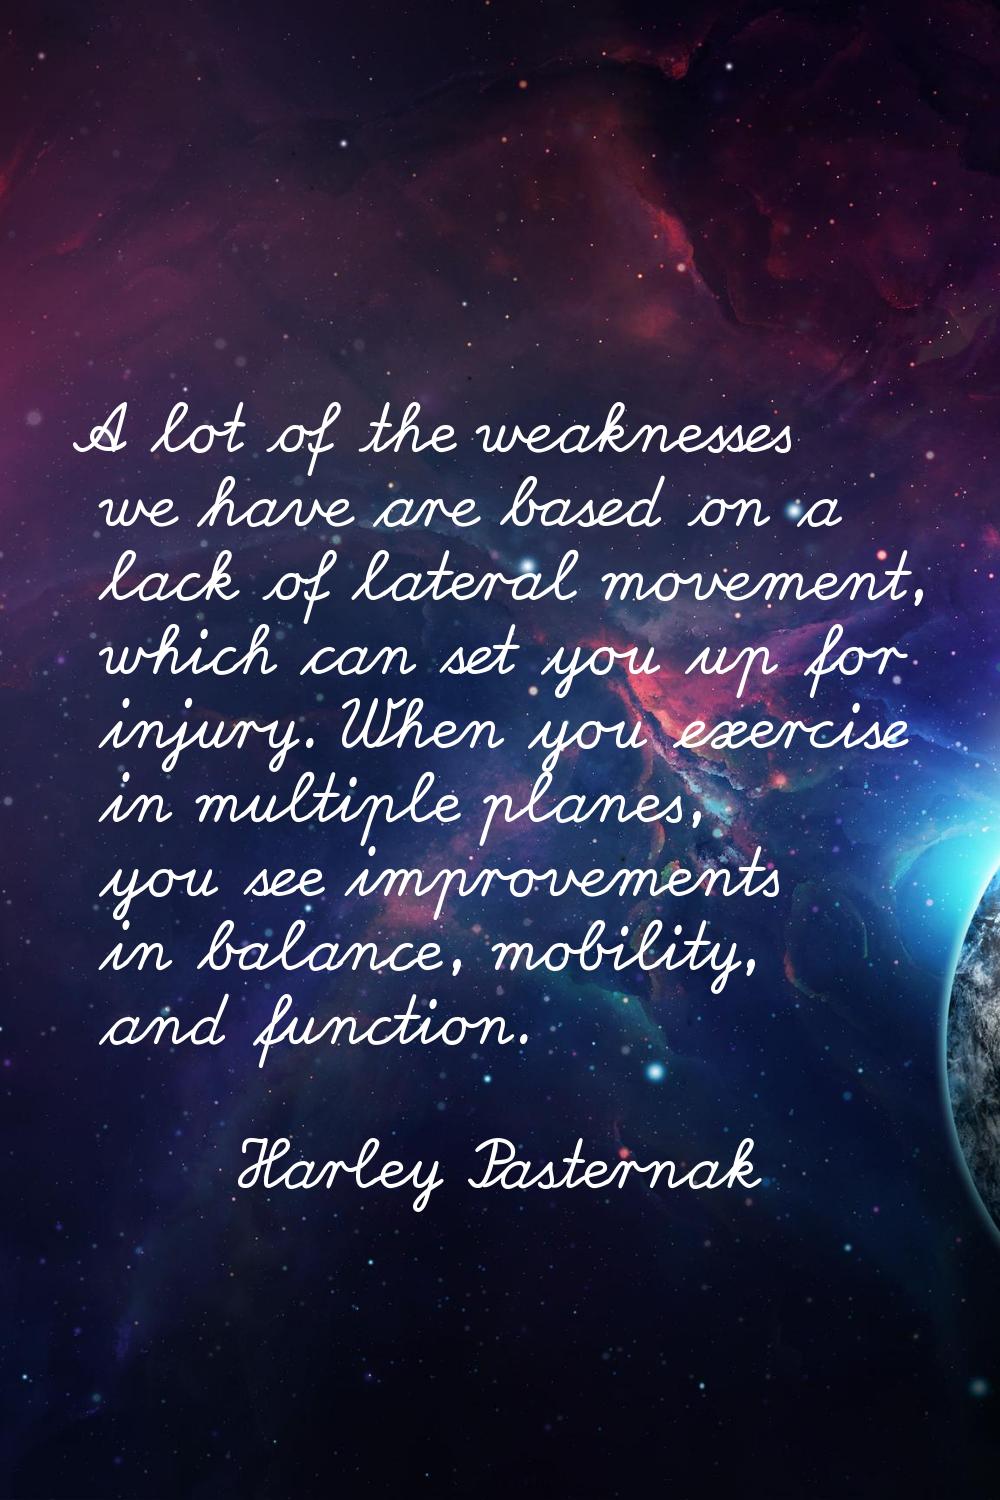 A lot of the weaknesses we have are based on a lack of lateral movement, which can set you up for i